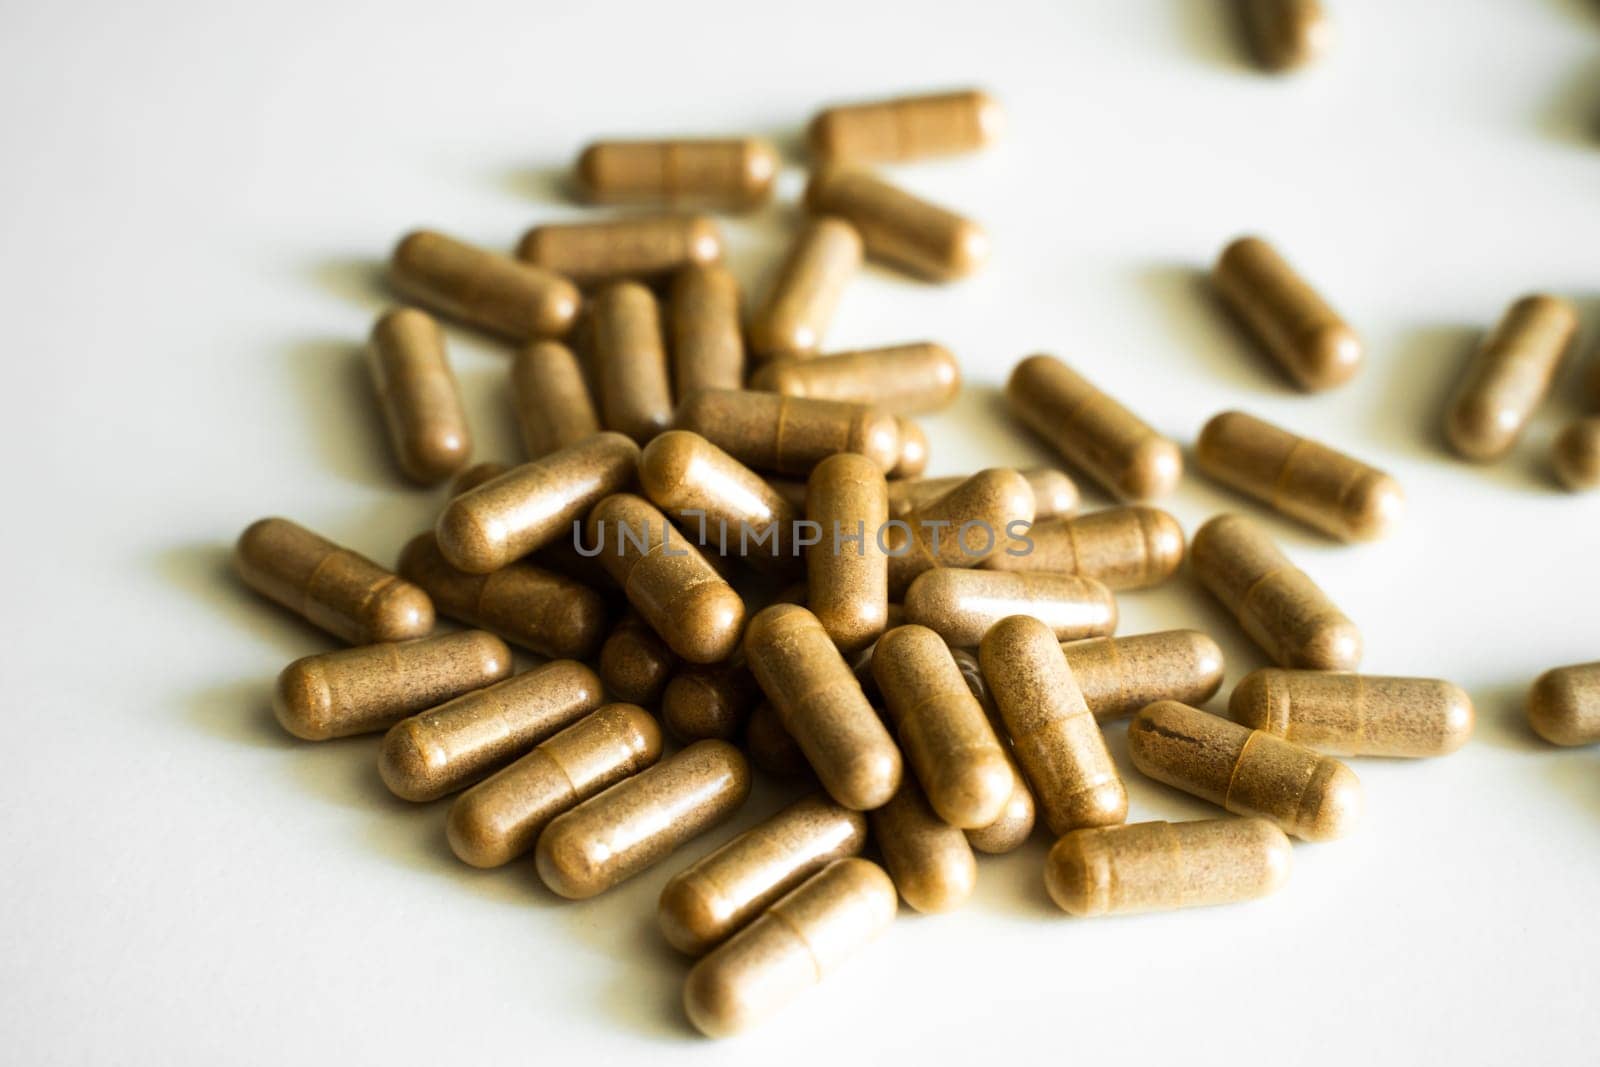 Brown tablets, pills, capsule of iron supplements. Health medication. Iron concept. Ferrum inscription. Medical supplies. Close-up